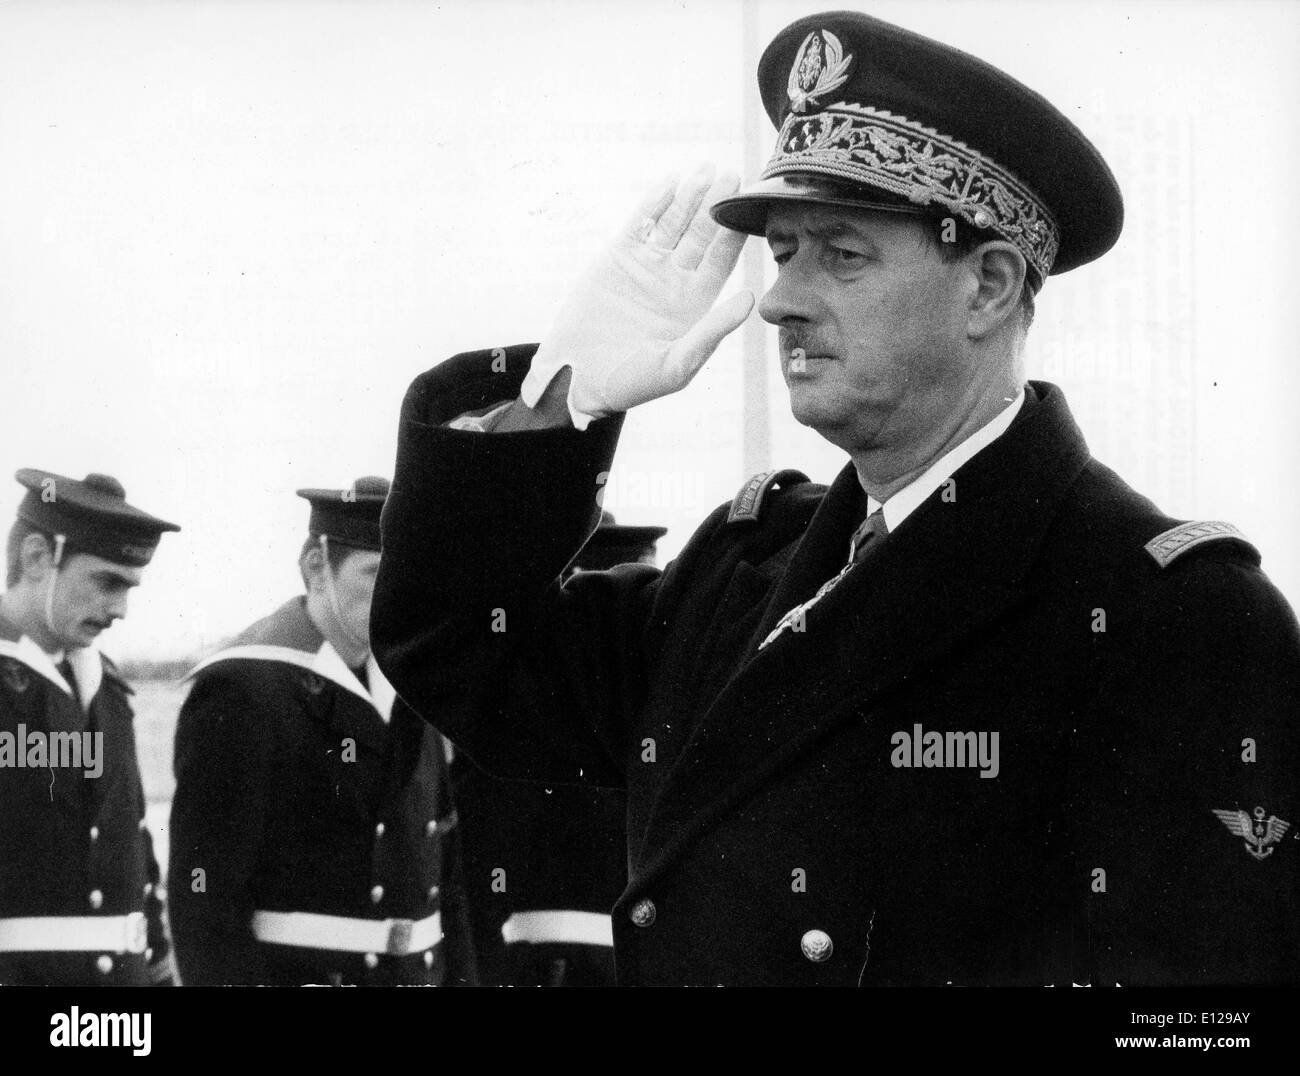 Apr 01, 2009 - London, England, United Kingdom - PHILIPPE DE GAULLE (born December 28, 1921, Paris, France) is a French politician and admiral. The son of General Charles de Gaulle, he is a former Senator[1] and was a general inspector of the French Navy. He married Henriette Montalambert de Cers in 1947 and had four children; Dr. Charles de Gaulle (1948-), Yves de Gaulle and Pierre de Gaulle (Credit Image: KEYSTONE Pictures USA/ZUMAPRESS.com) Stock Photo